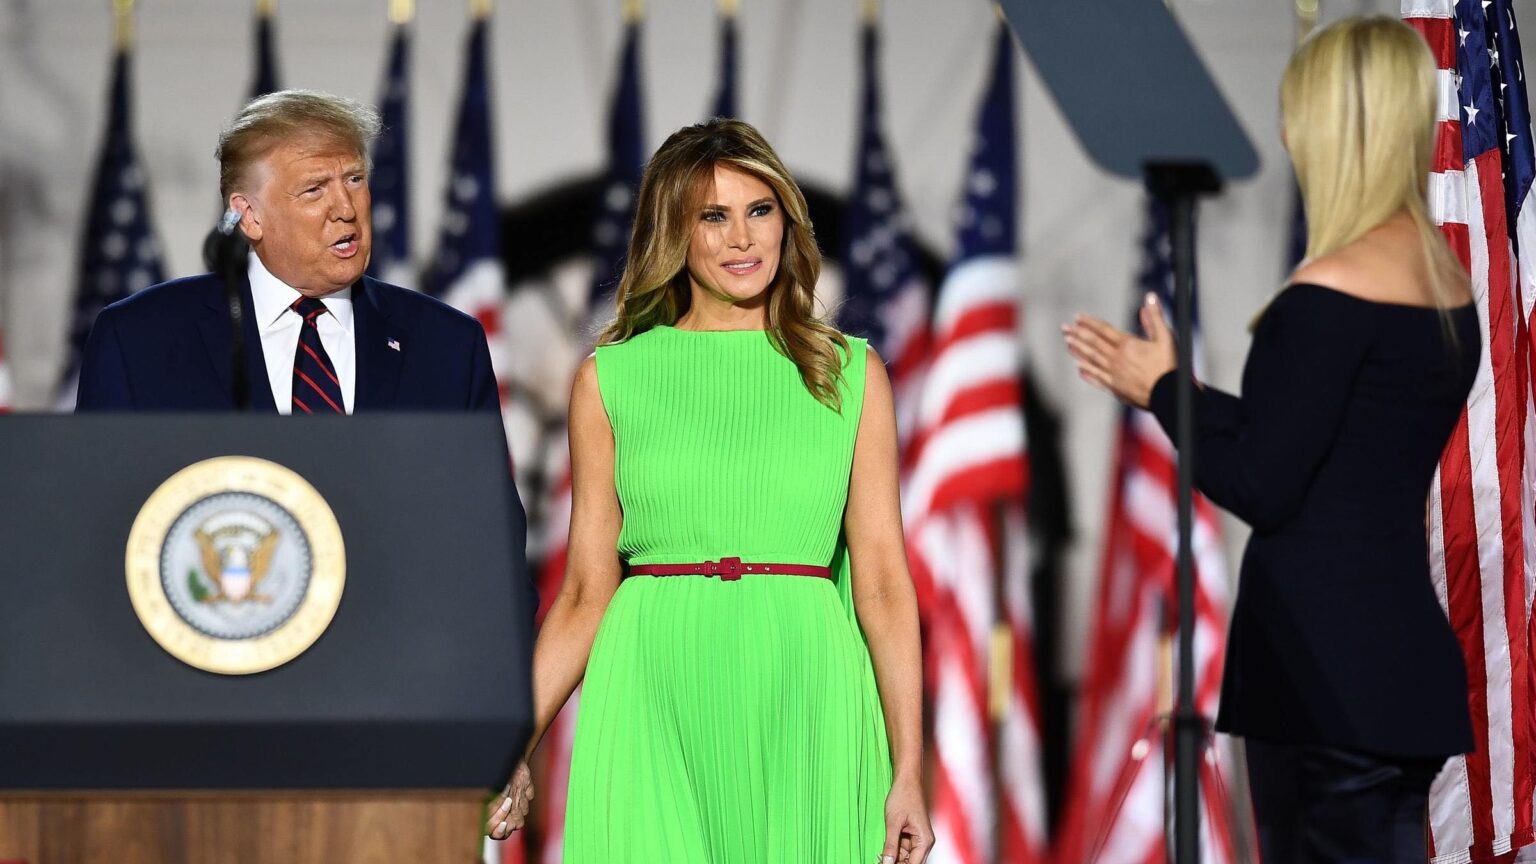 Melania Trump has always been known for being expressionless, but during the RNC, It looked like she was glitching. So Twitter decided to make it a meme.